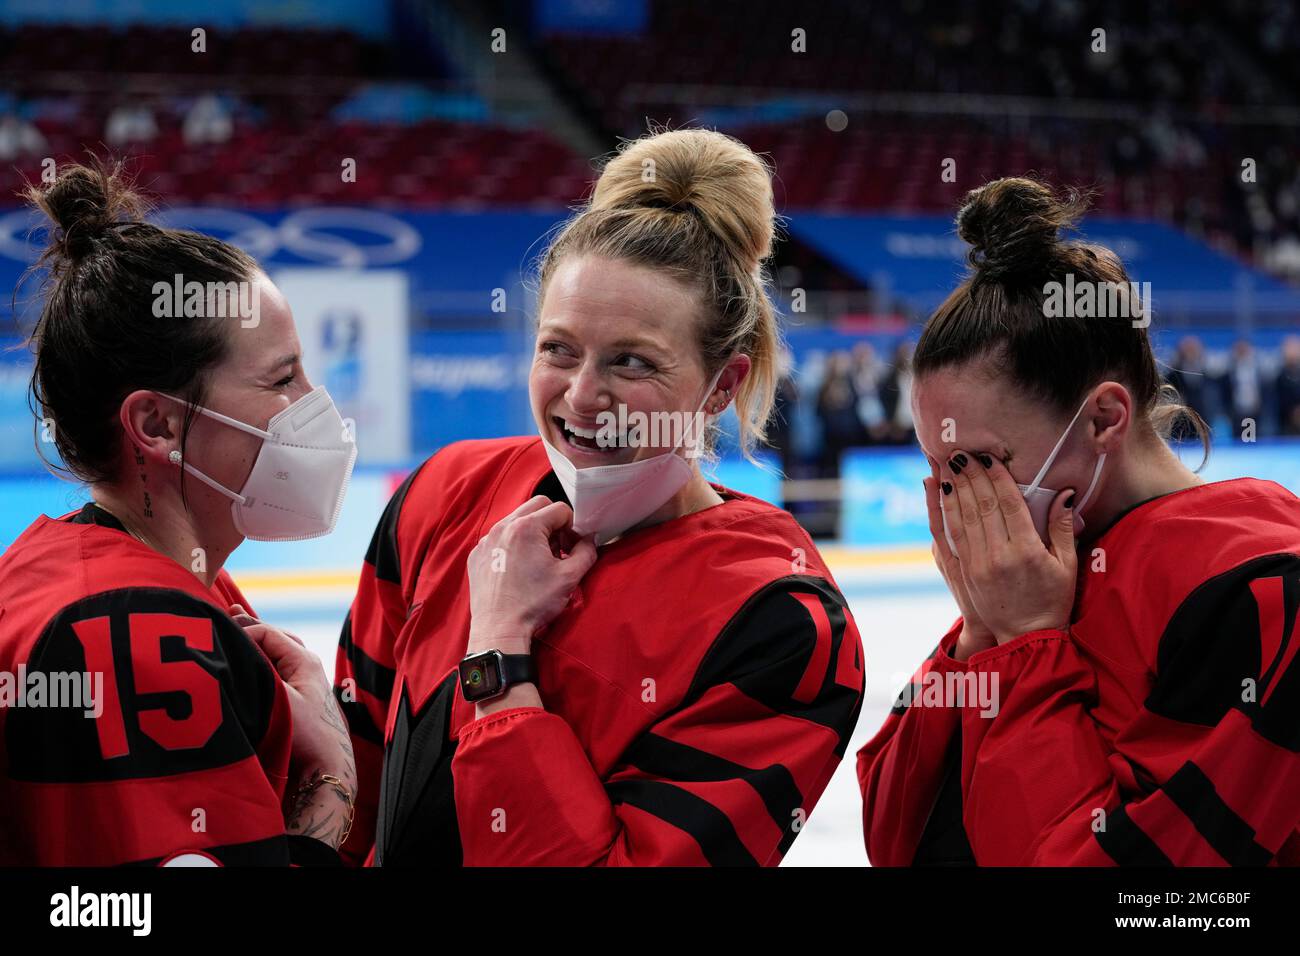 https://c8.alamy.com/comp/2MC6B0F/canadas-melodie-daoust-from-left-renata-fast-and-canadas-jill-saulnier-11-celebrate-after-defeating-the-united-states-in-the-womens-gold-medal-hockey-game-at-the-2022-winter-olympics-thursday-feb-17-2022-in-beijing-ap-photopetr-david-josek-2MC6B0F.jpg